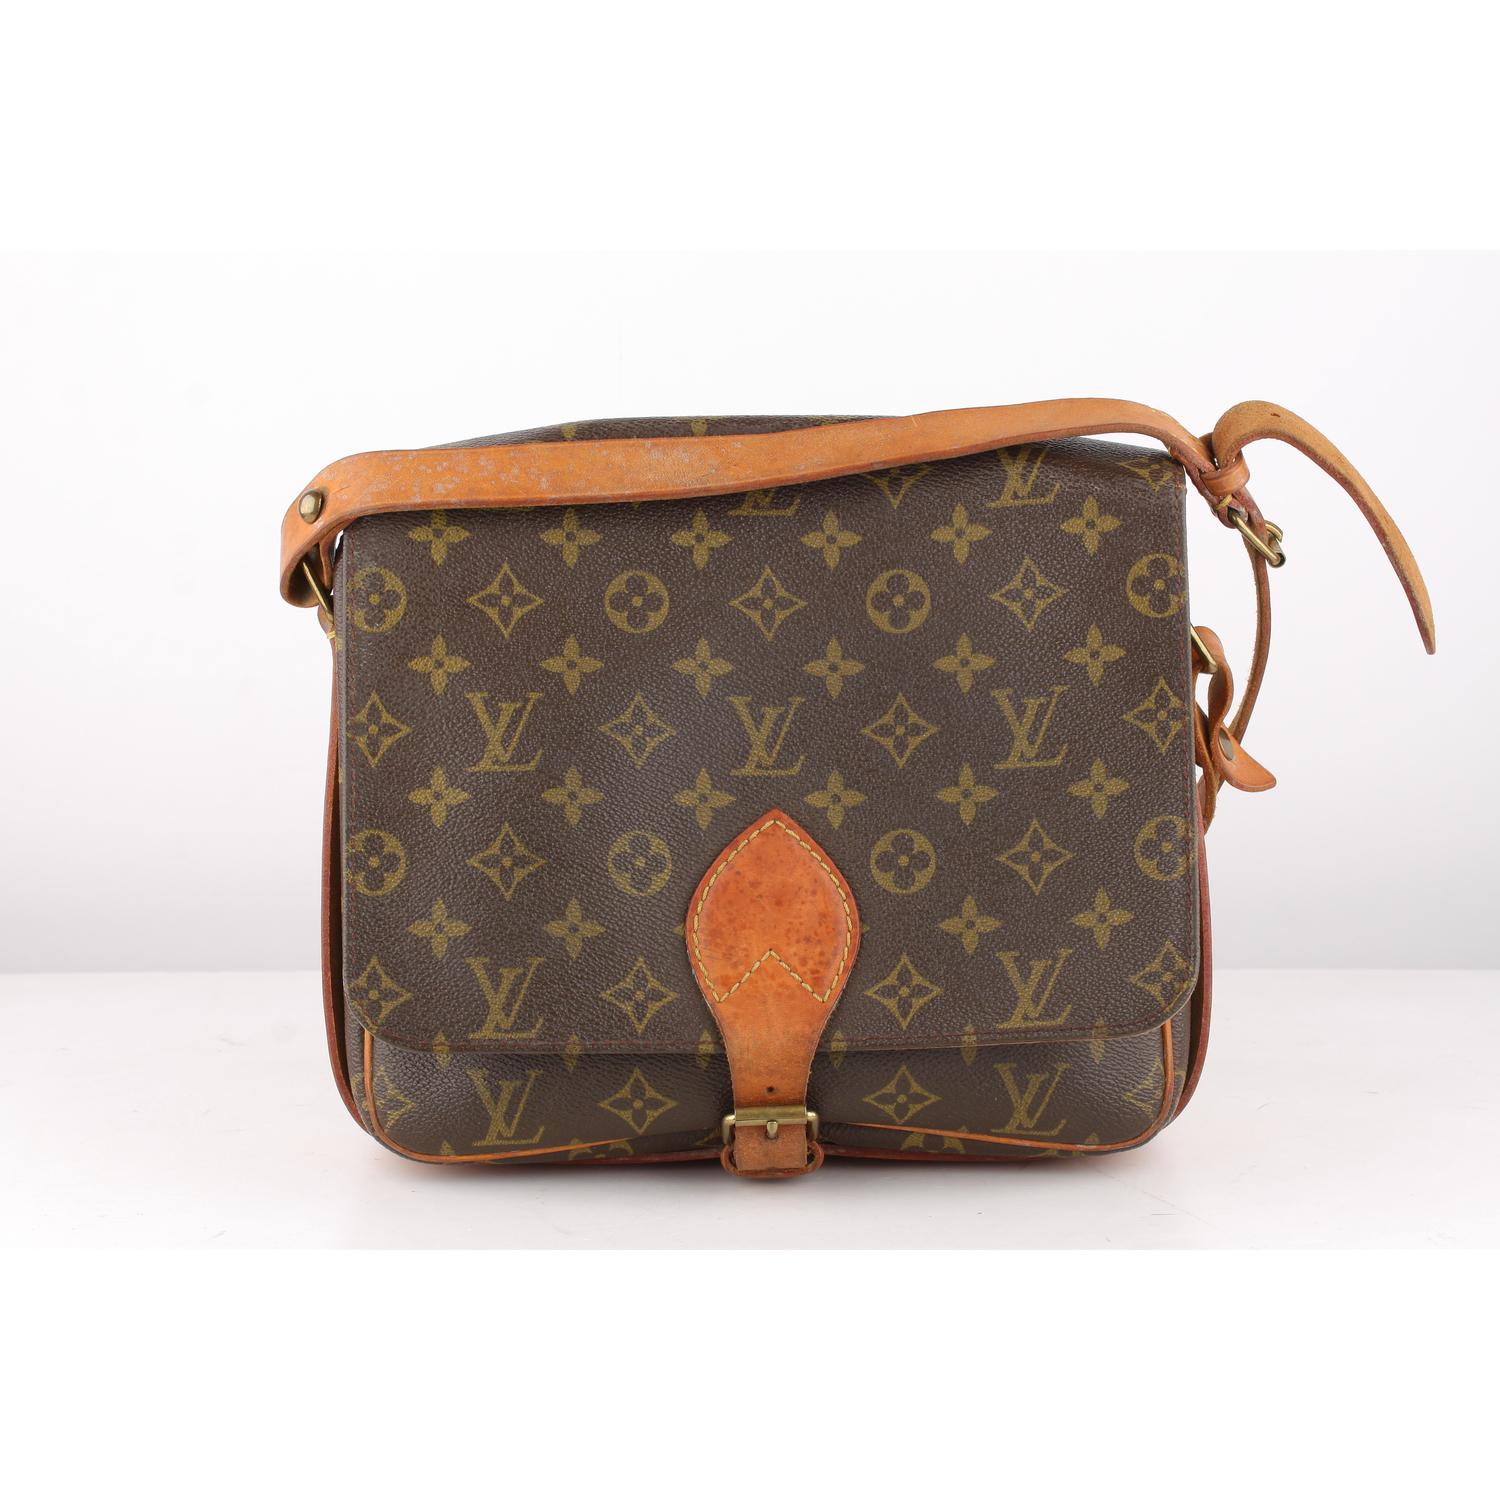 Louis Vuitton Vintage Monogram Canvas Cartouchiere Messenger Bag

Material: Canvas 
Color: Brown 
Model: Cartouchiere Messenger Bag 
Gender : Women
Country of Manufacture: France
Size : Medium
Bag Depth: 3 inches - 7,6 cm 
Bag Height: 8.5 inches -